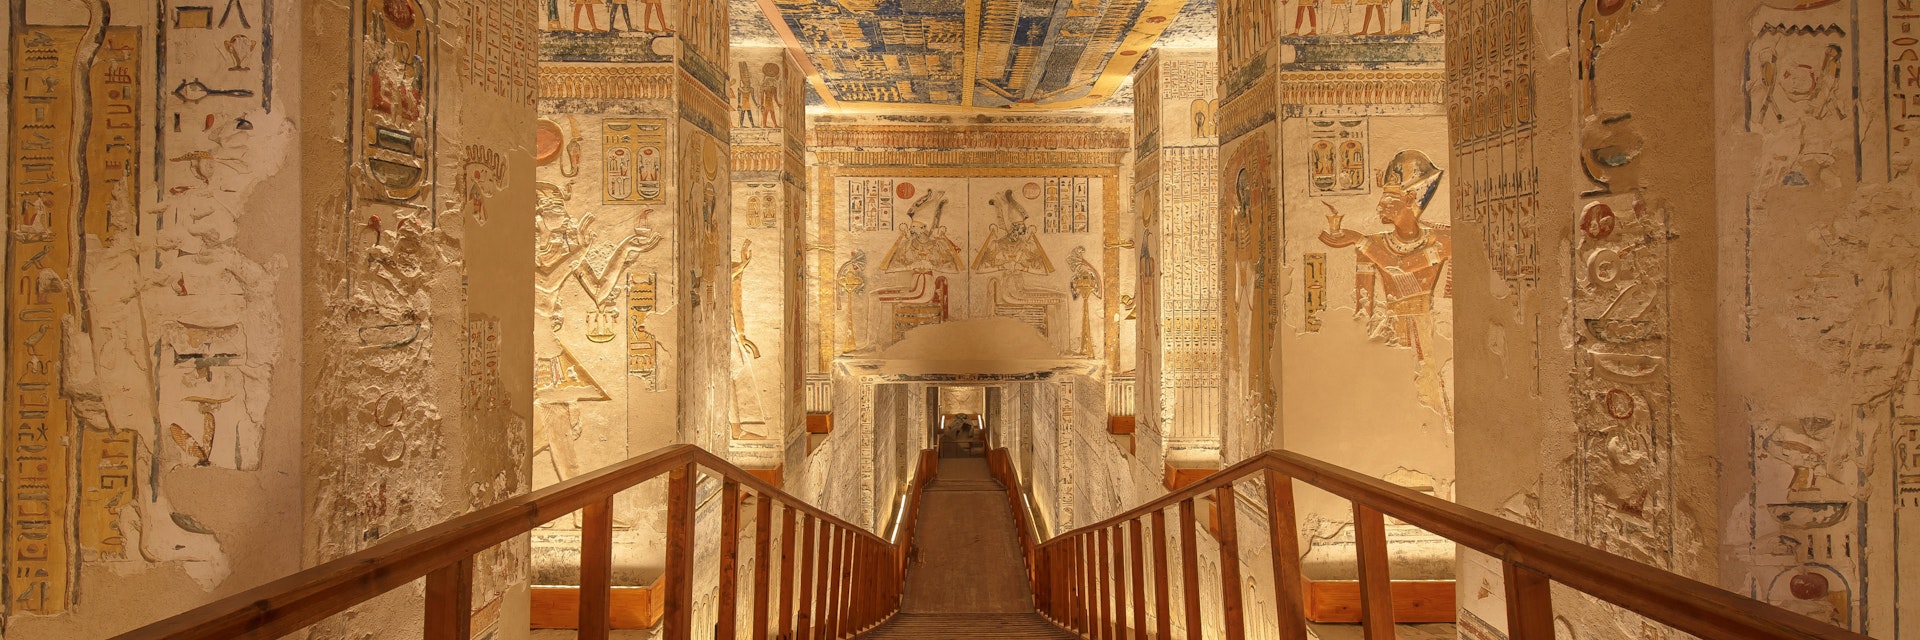 LUXOR, EGYPT - FEBRUARY 5 2016 - Unique shot of the Ramesses VI tomb in Valley of the Kings. Obtaining permission for taking images there is painstaking but worth it.; Shutterstock ID 467883095; Your name (First / Last): Lauren Keith; GL account no.: 65050; Netsuite department name: Online Editorial; Full Product or Project name including edition: Southern Egypt temples article